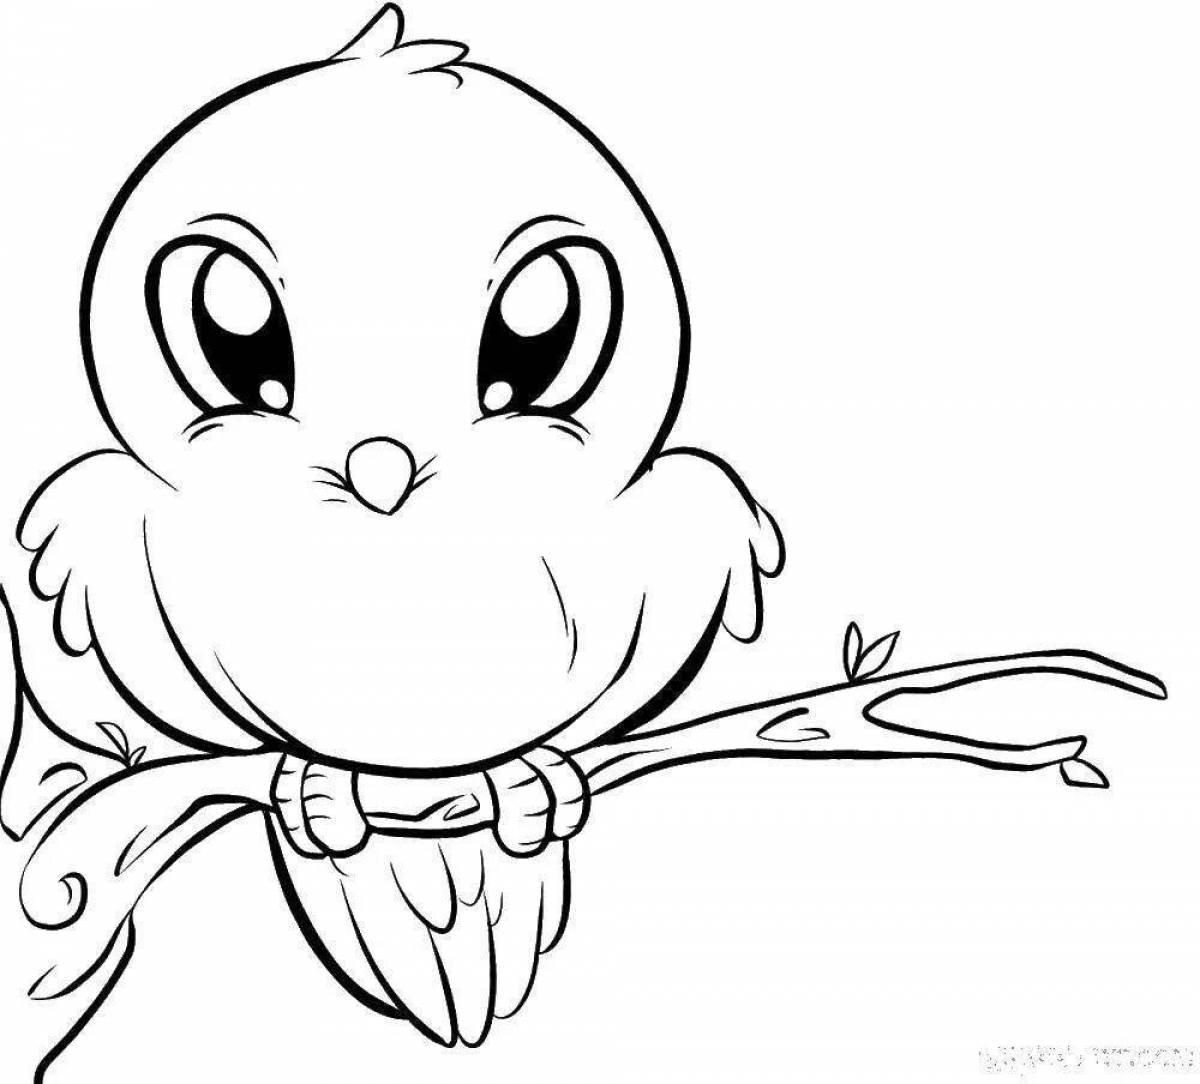 Coloring pages with cute birds for kids